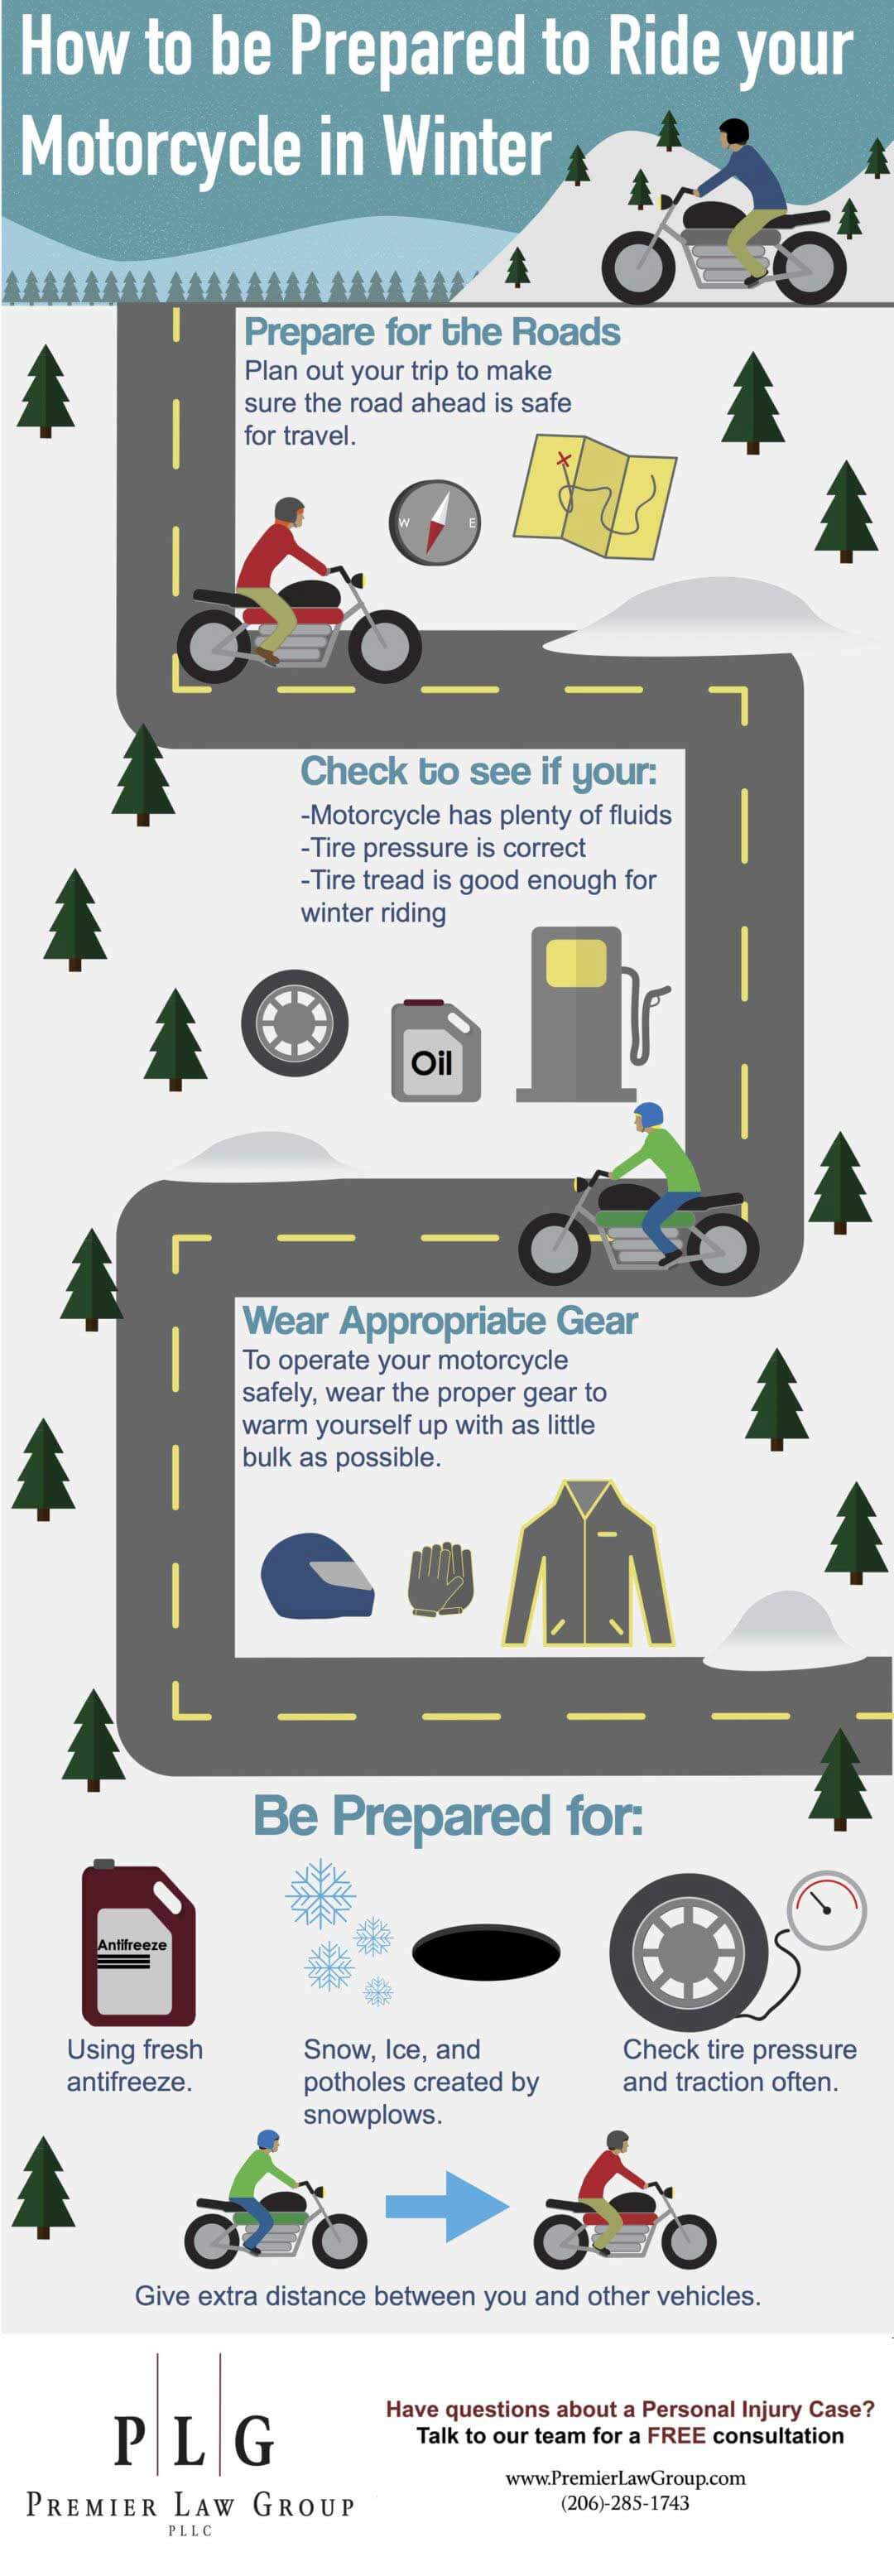 How to be prepared to ride your motorcycle in winter infographic